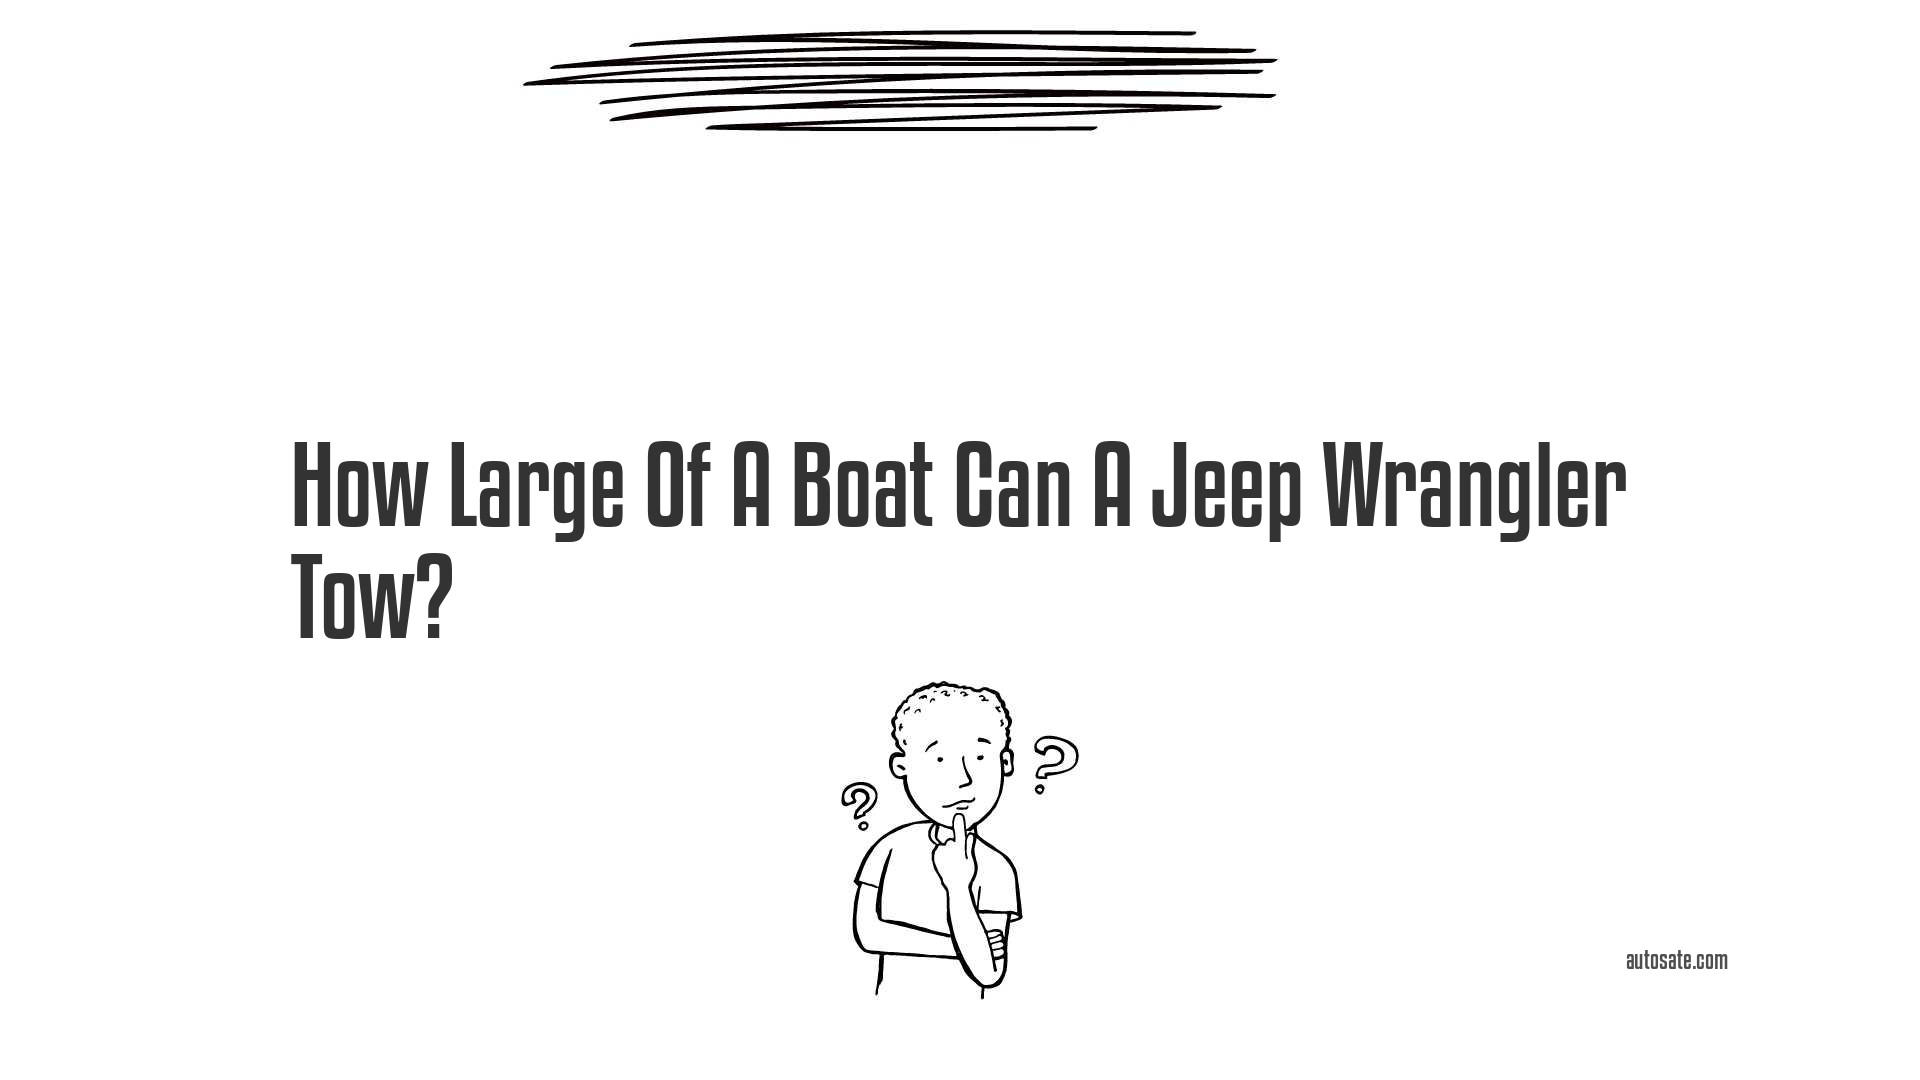 How Large Of A Boat Can A Jeep Wrangler Tow?